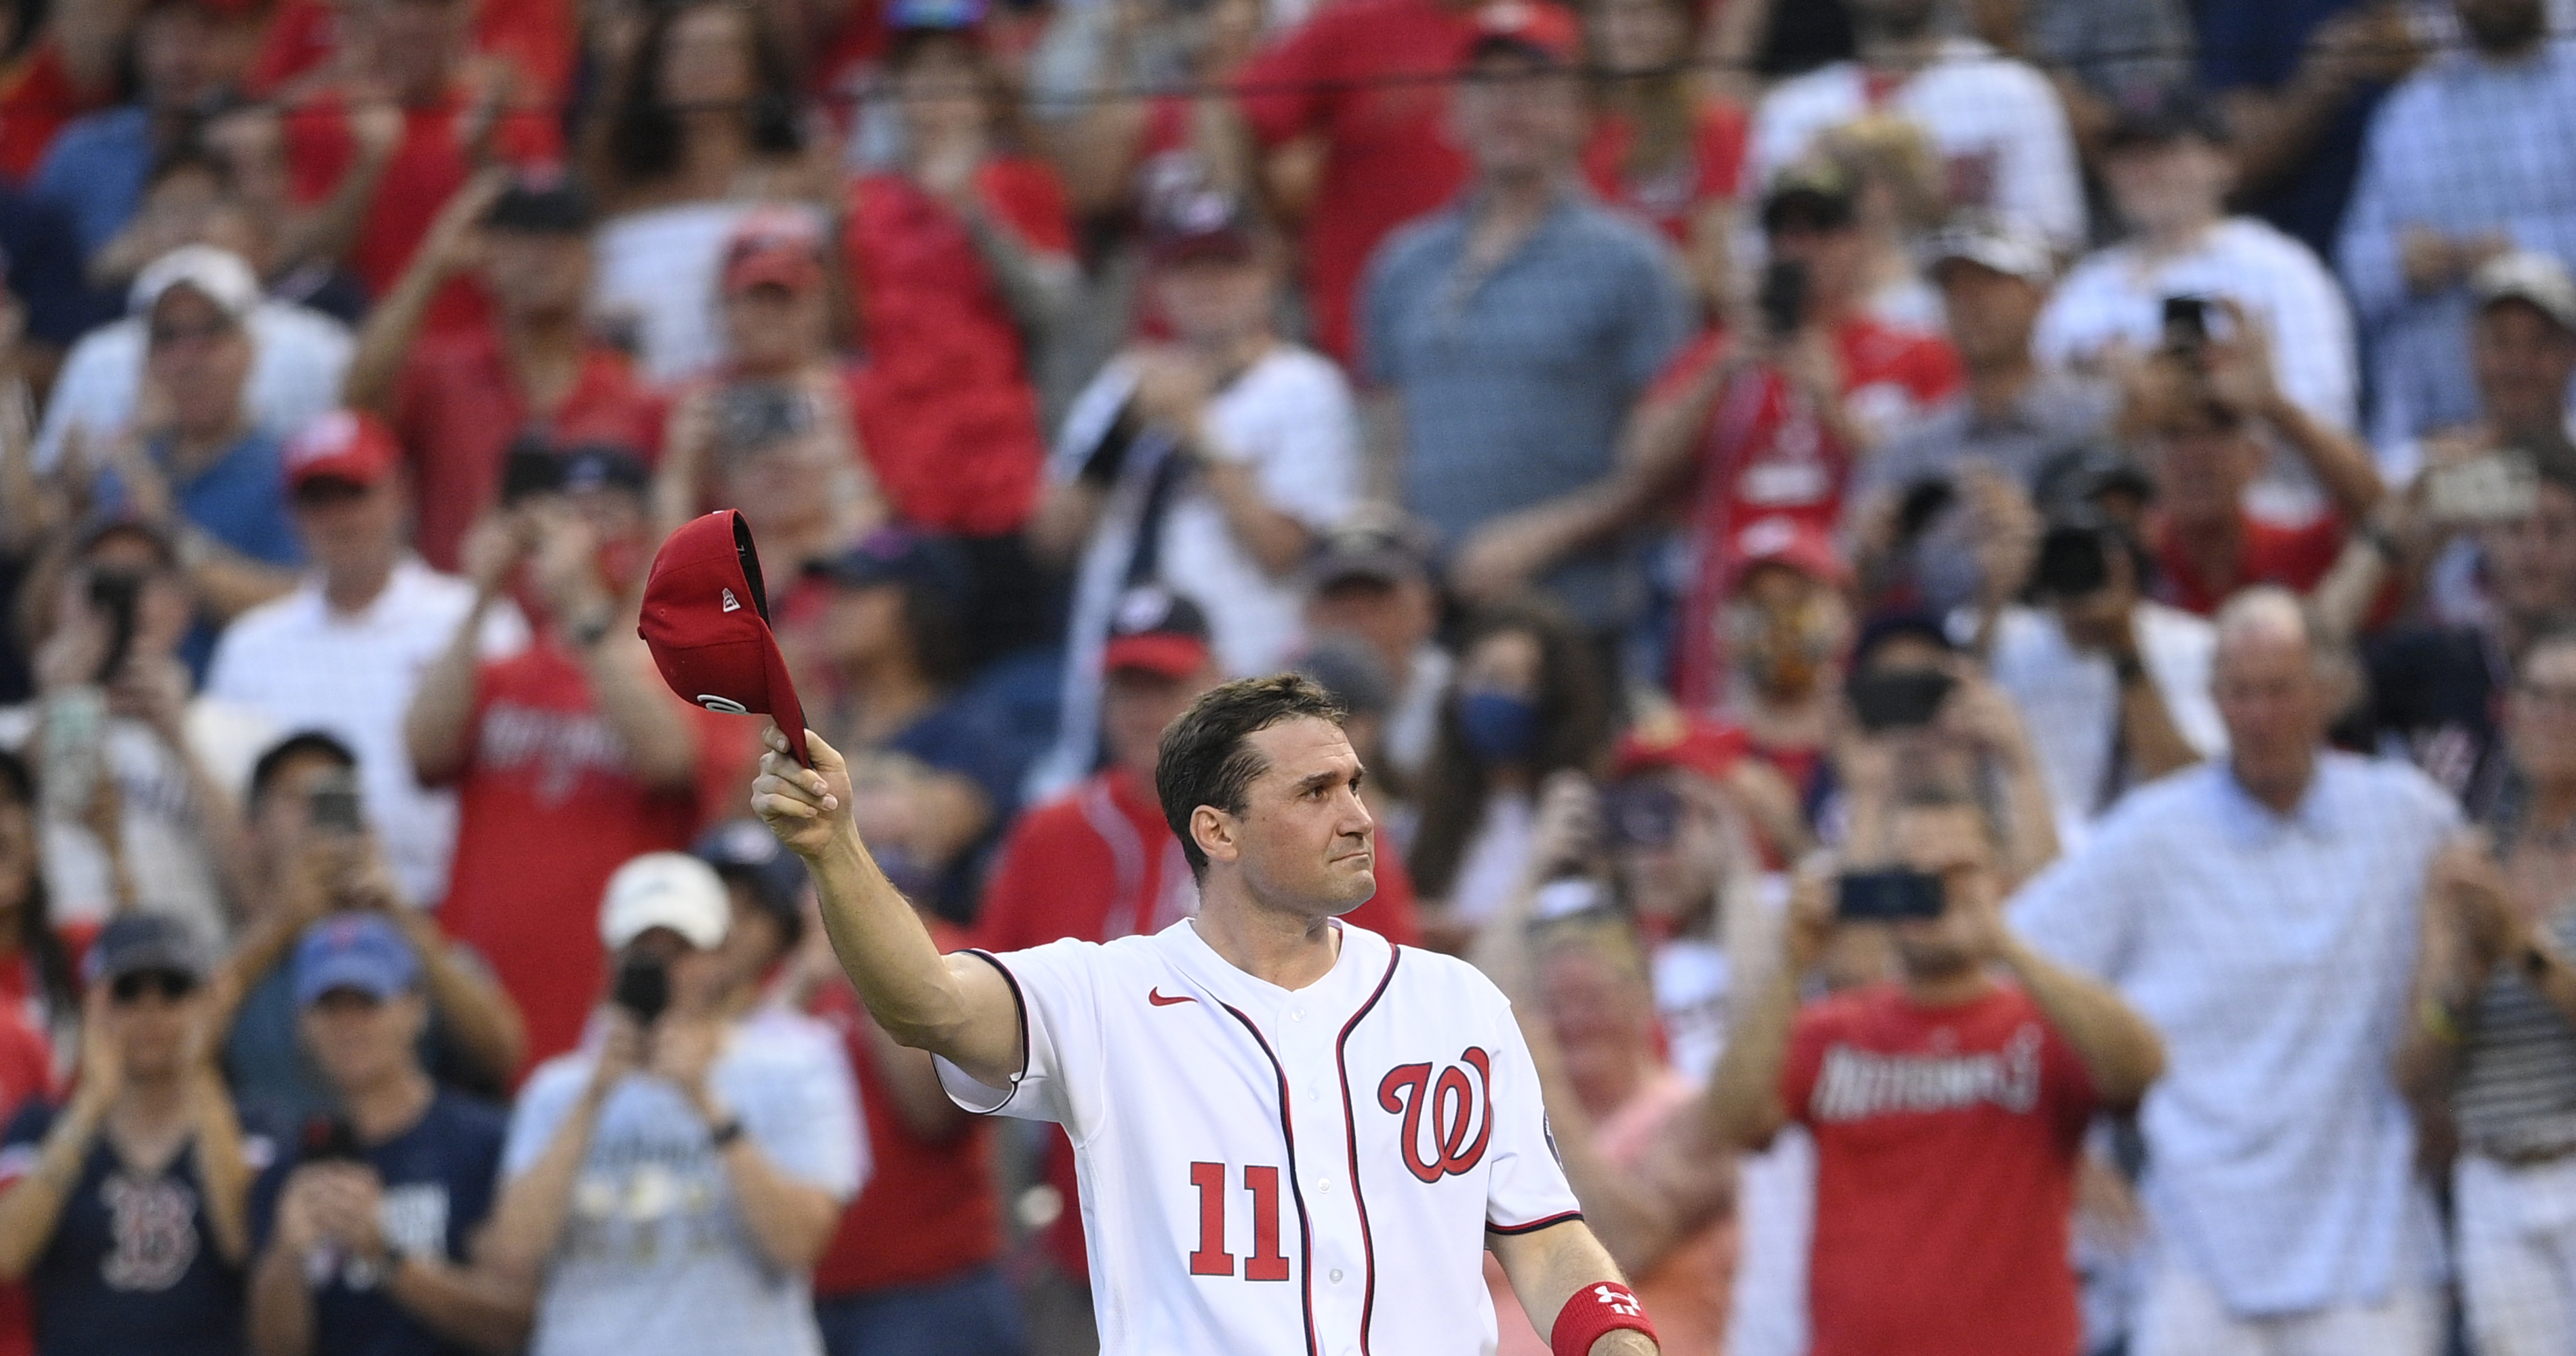 Ryan Zimmerman gets ready for his 16th season with Nationals